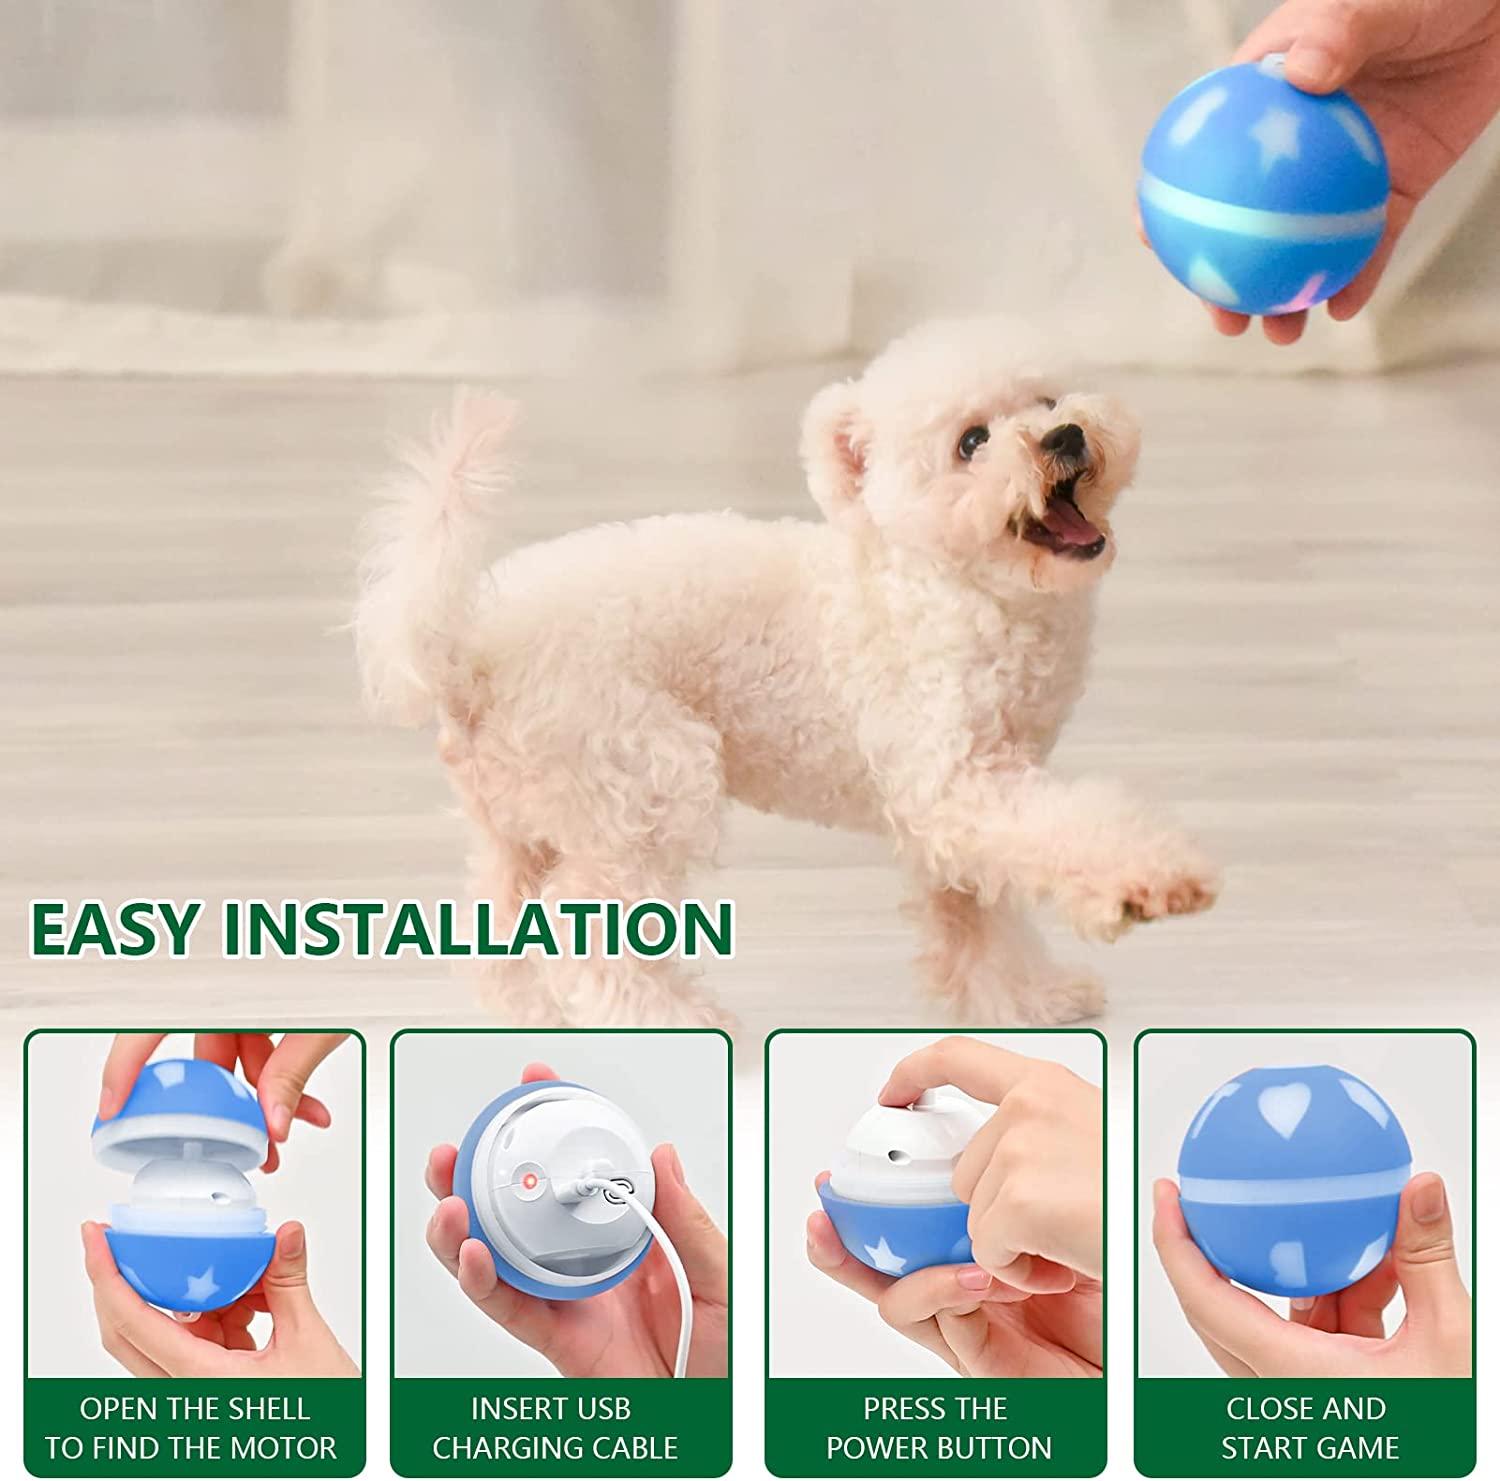 AUKL Interactive Dog Toys Wicked Ball Self Moving Motion Activated Ball